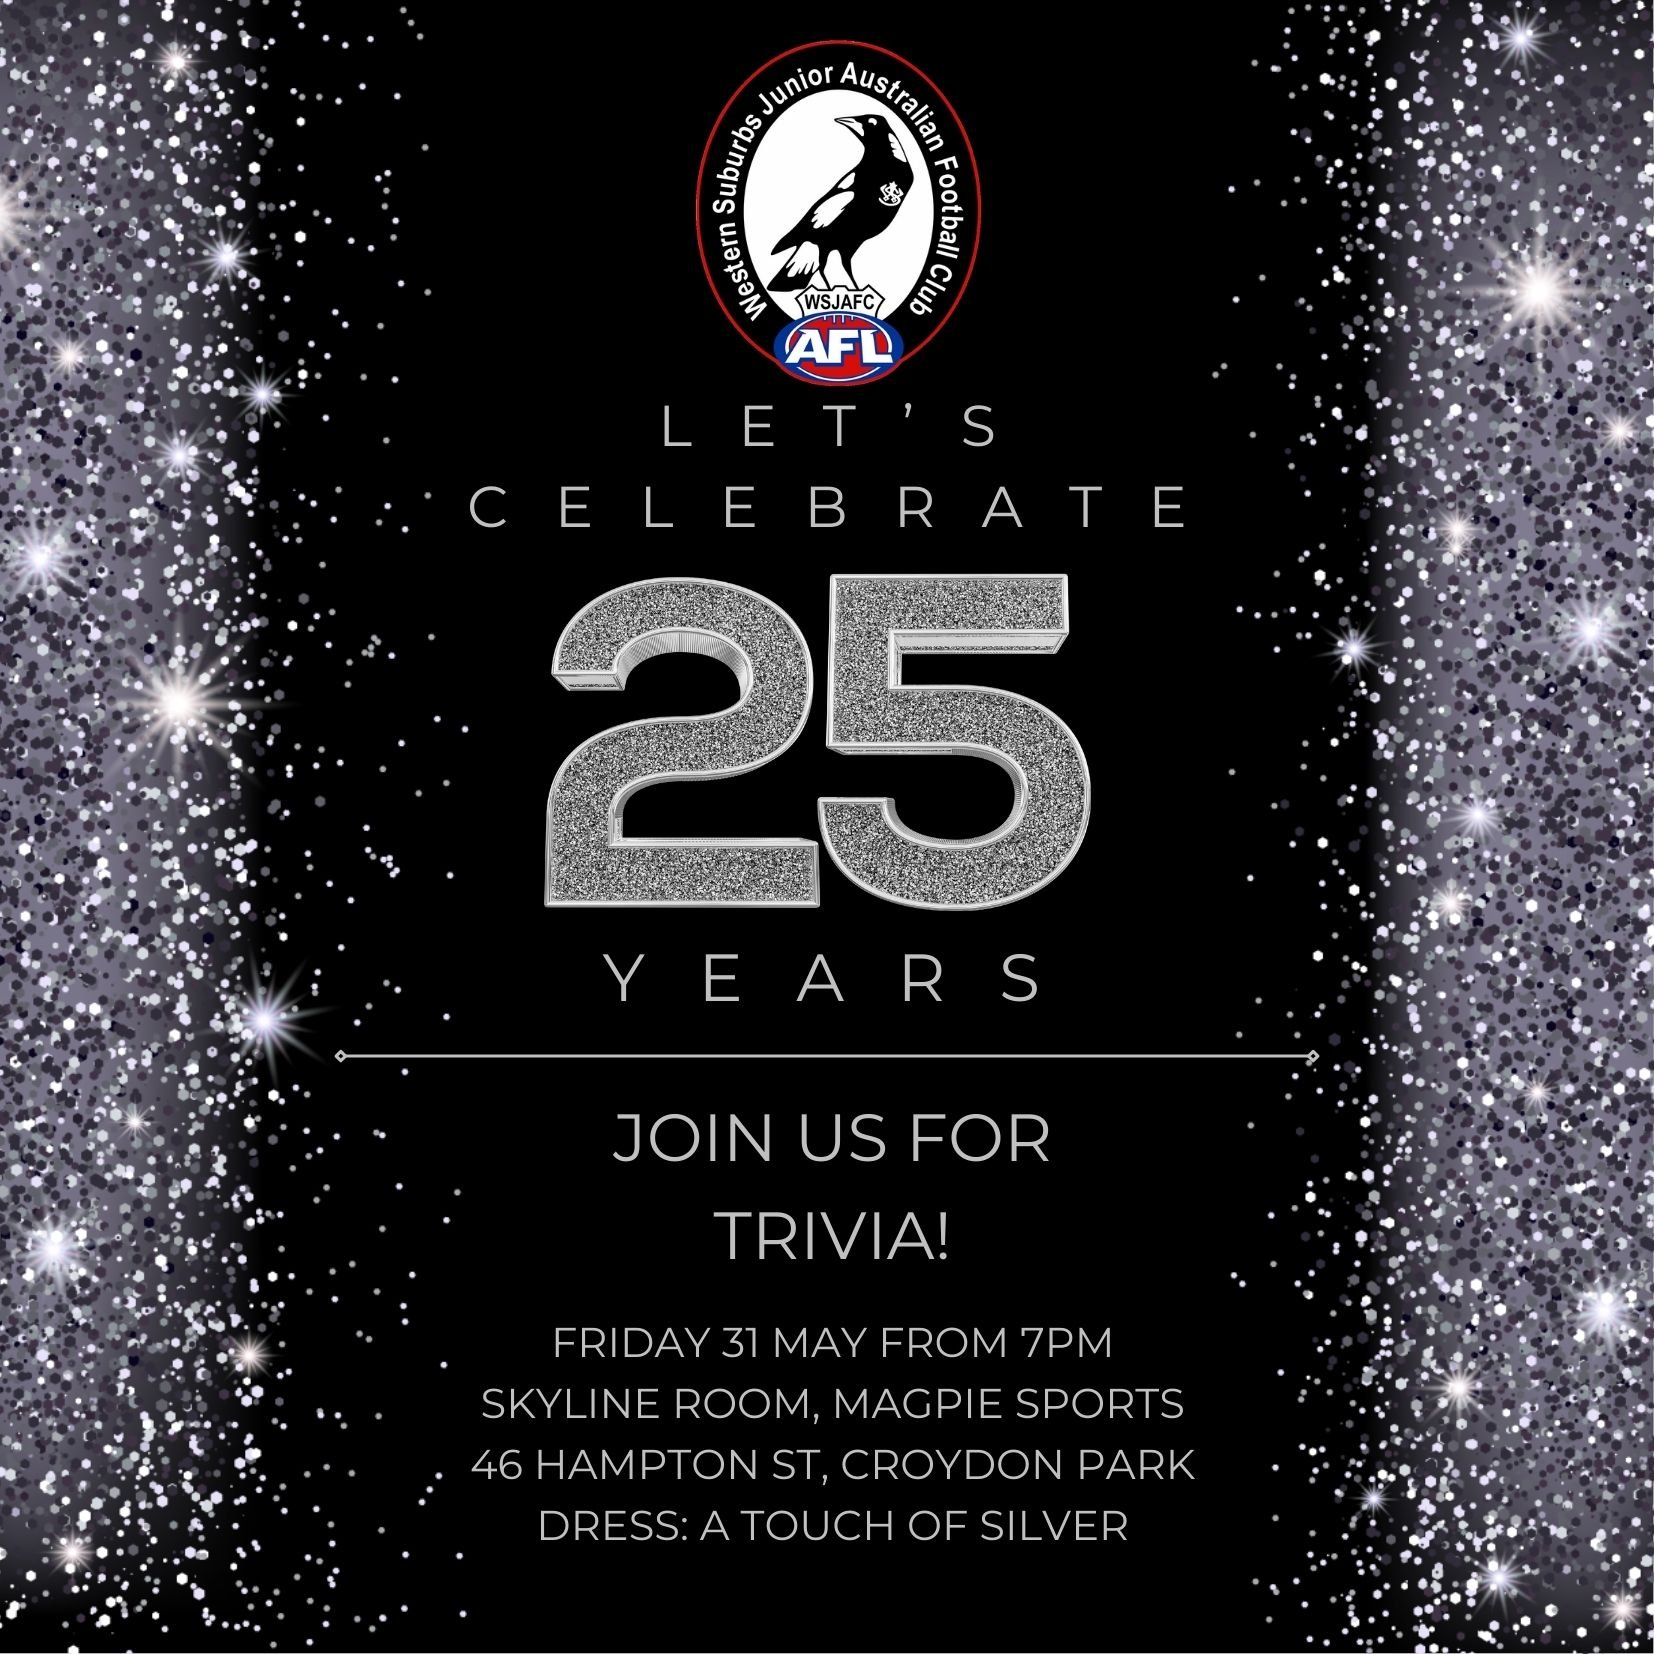 Let's get together as a club to celebrate 25 years of Wests AFL Juniors with a night of Trivia! There will be an auction and raffle with great prizes and all proceeds will go towards resources and equipment for the club.

All details via the link: ht